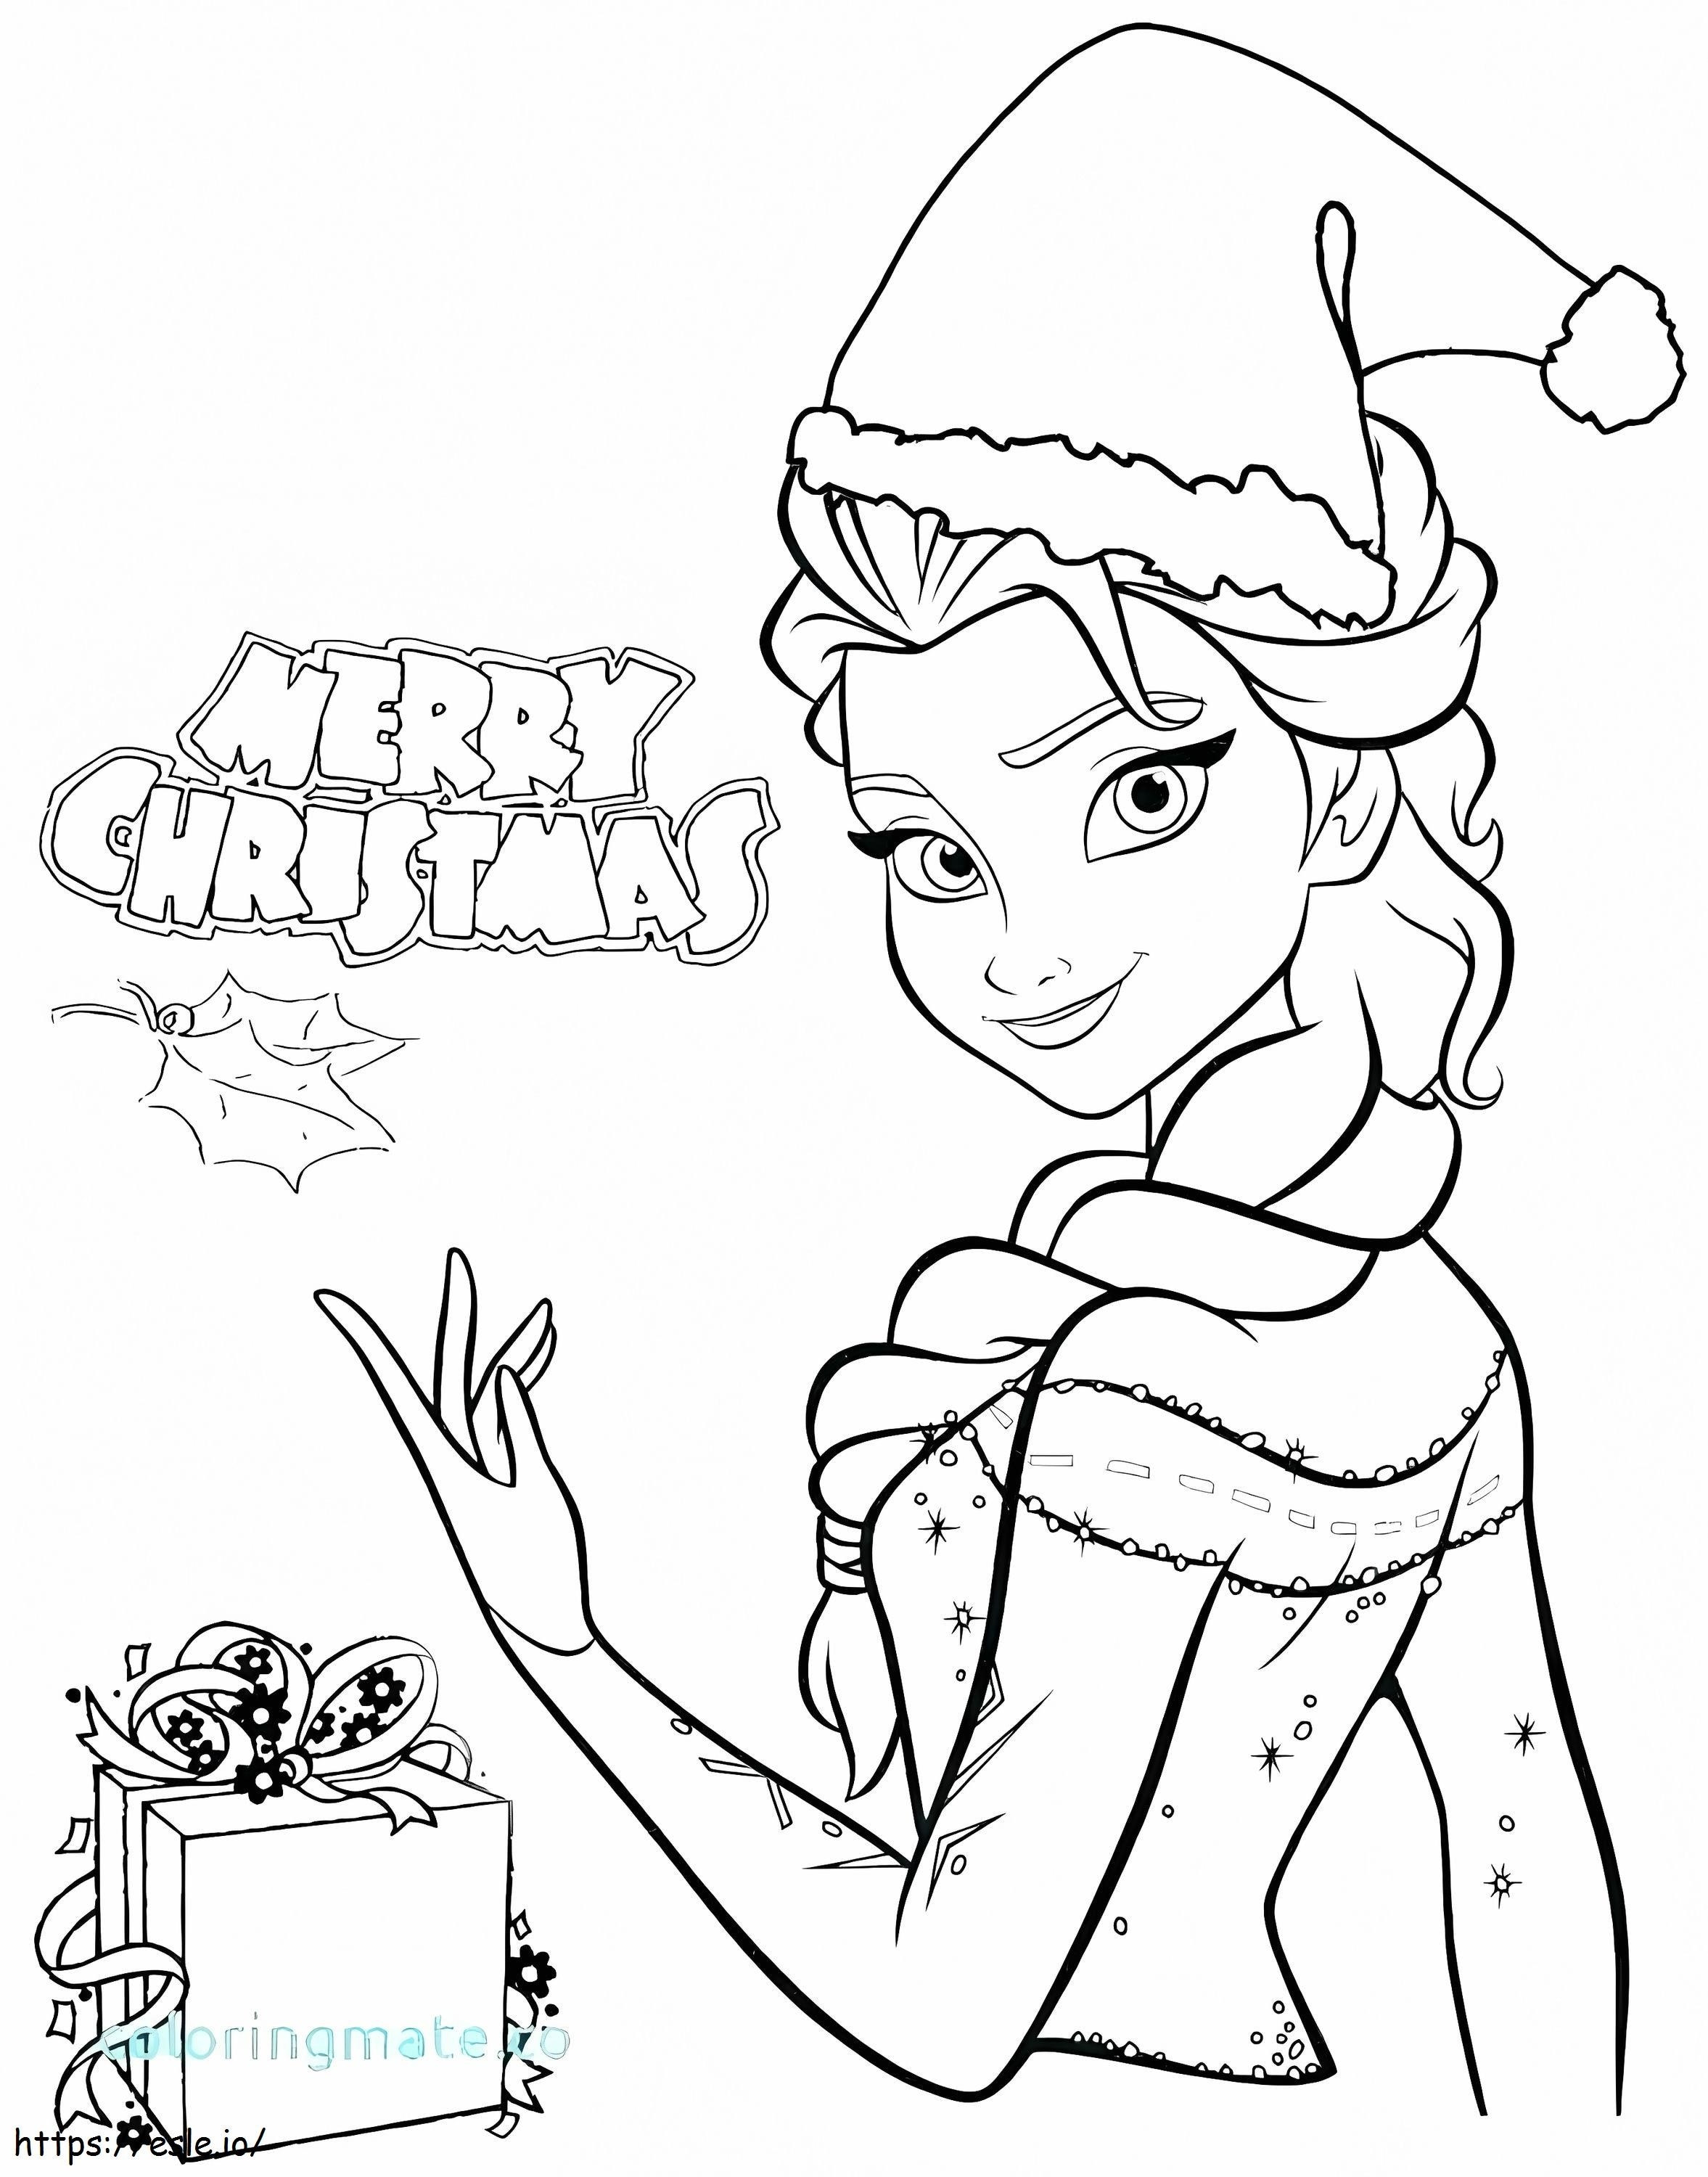 1544231004 Disney Frozen Free Frozen Free Frozen Free Free Printable Disney Frozen Christmas coloring page